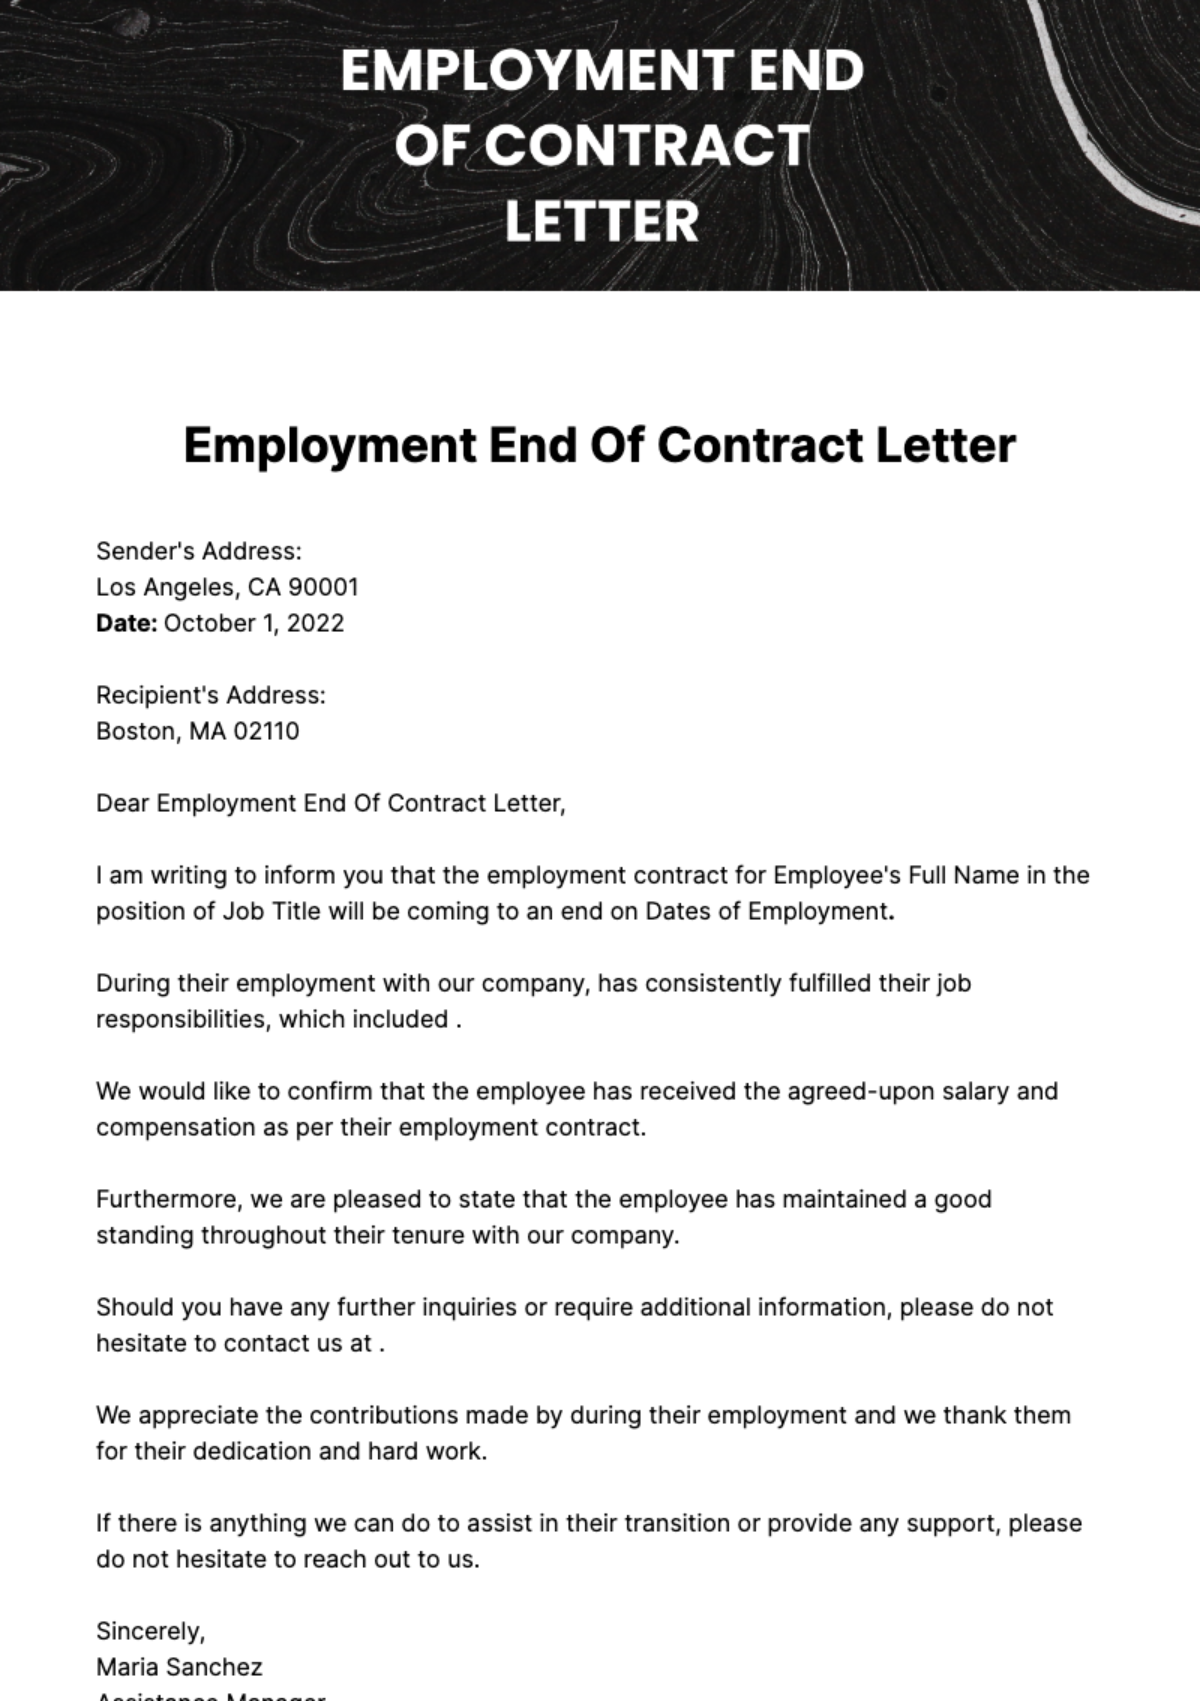 Free Employment End Of Contract Letter Template